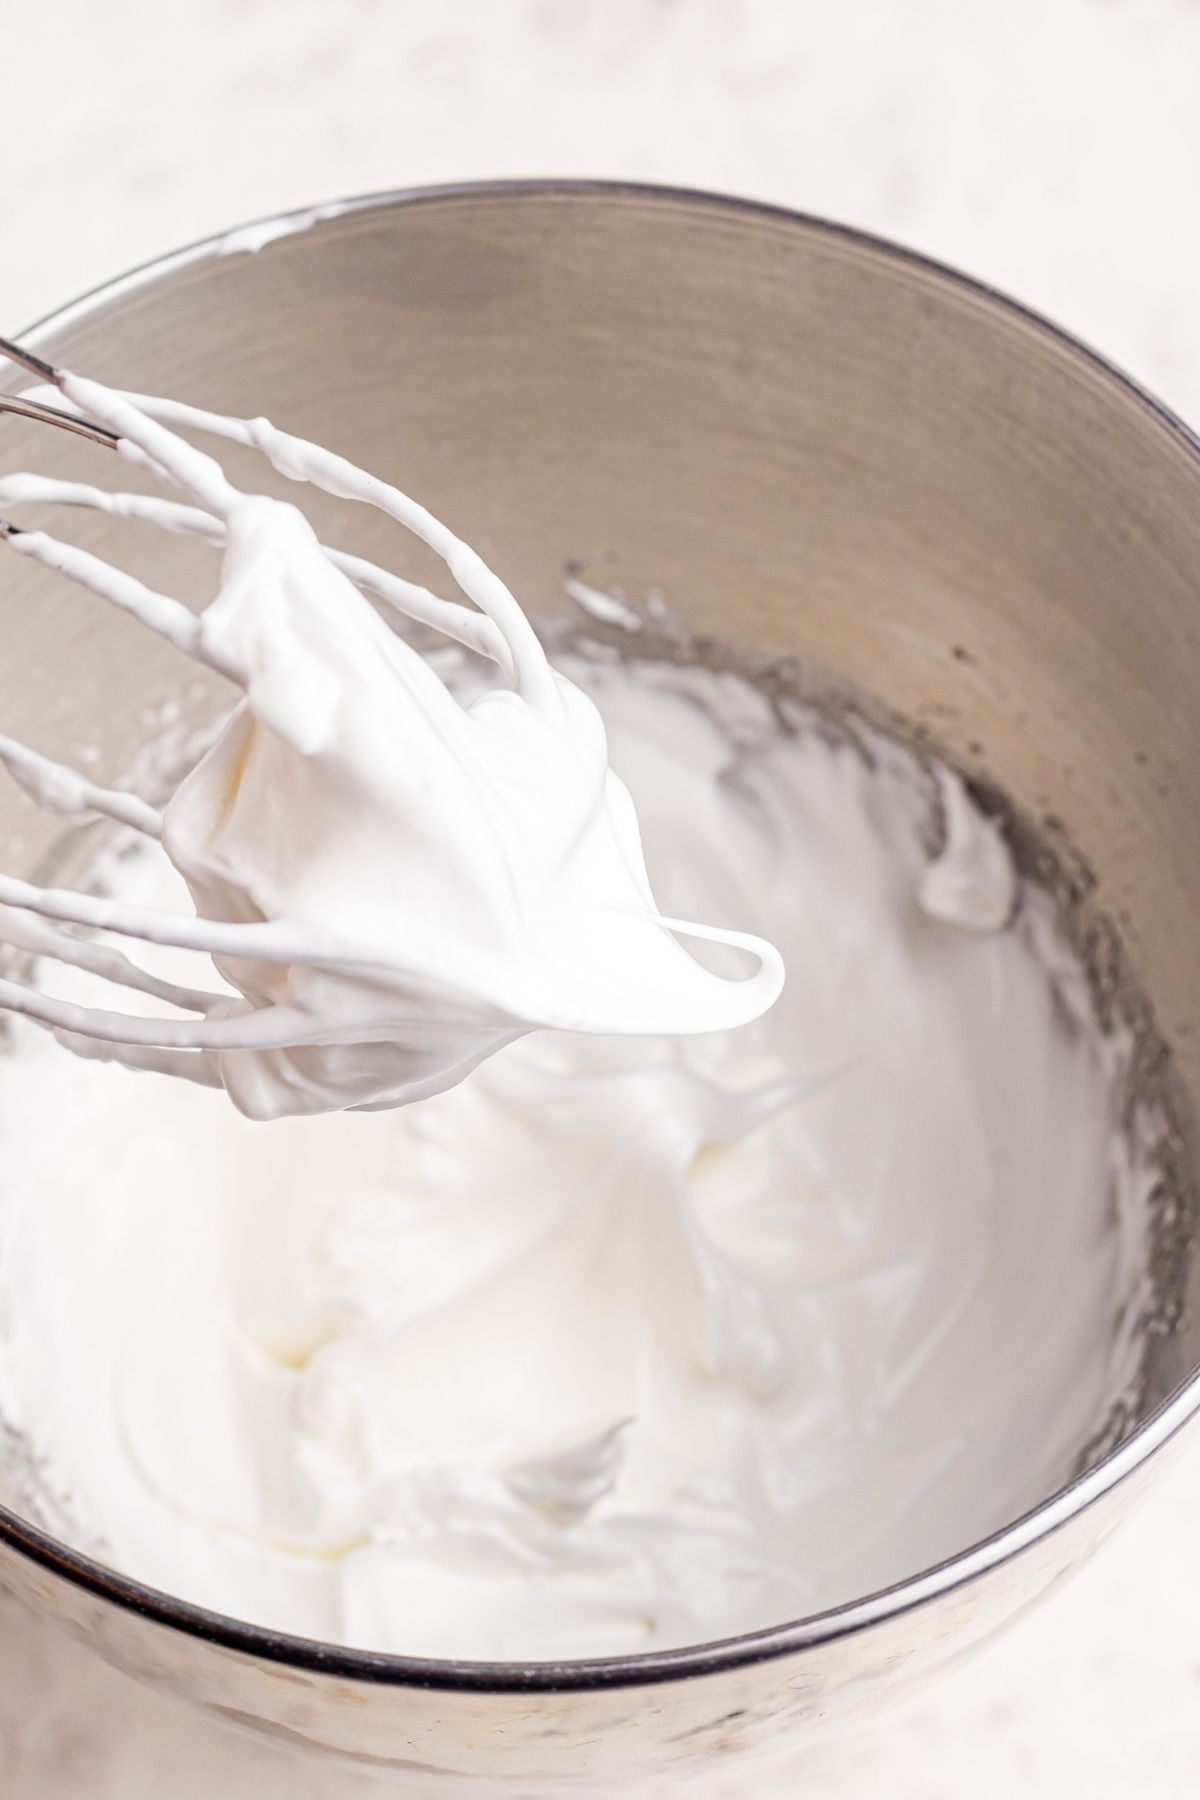 Meringue beaten into glossy peaks on a wire whisk over a mixing bowl